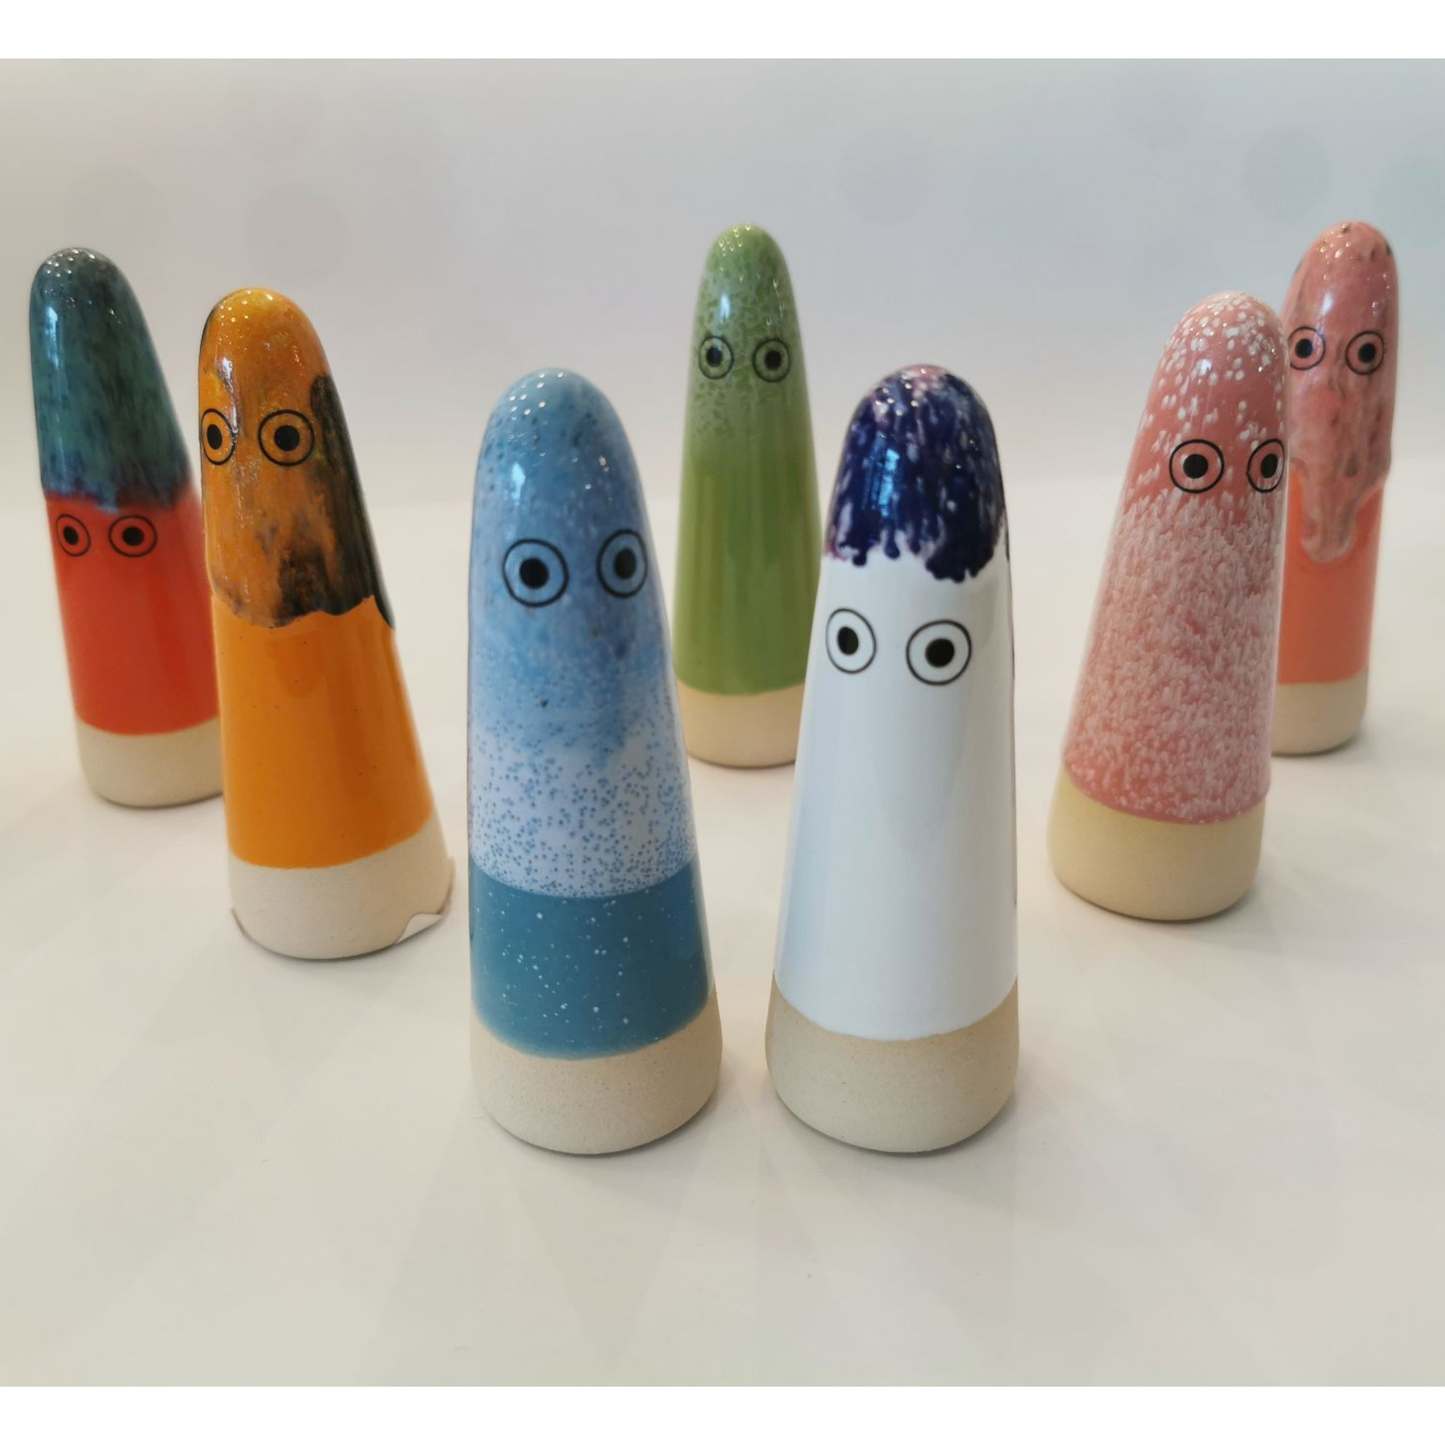 A group of 7 cone-shaped ceramic figurines with hand-painted eyes